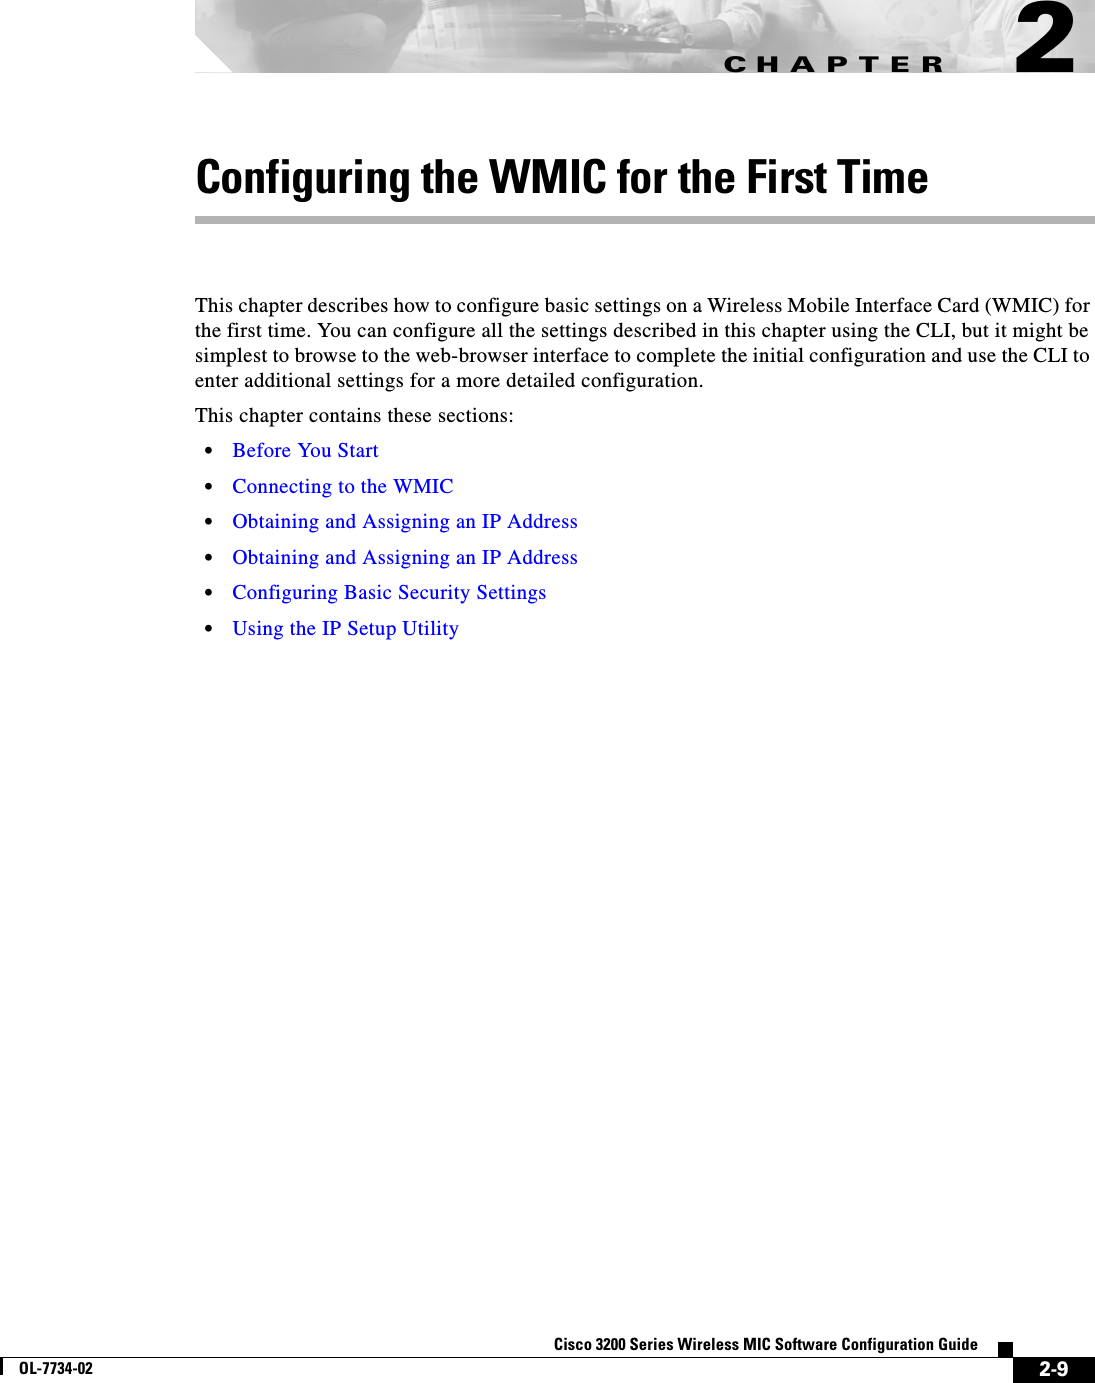 CHAPTER2-9Cisco 3200 Series Wireless MIC Software Configuration GuideOL-7734-022Configuring the WMIC for the First TimeThis chapter describes how to configure basic settings on a Wireless Mobile Interface Card (WMIC) for the first time. You can configure all the settings described in this chapter using the CLI, but it might be simplest to browse to the web-browser interface to complete the initial configuration and use the CLI to enter additional settings for a more detailed configuration. This chapter contains these sections:•Before You Start•Connecting to the WMIC•Obtaining and Assigning an IP Address•Obtaining and Assigning an IP Address•Configuring Basic Security Settings•Using the IP Setup Utility